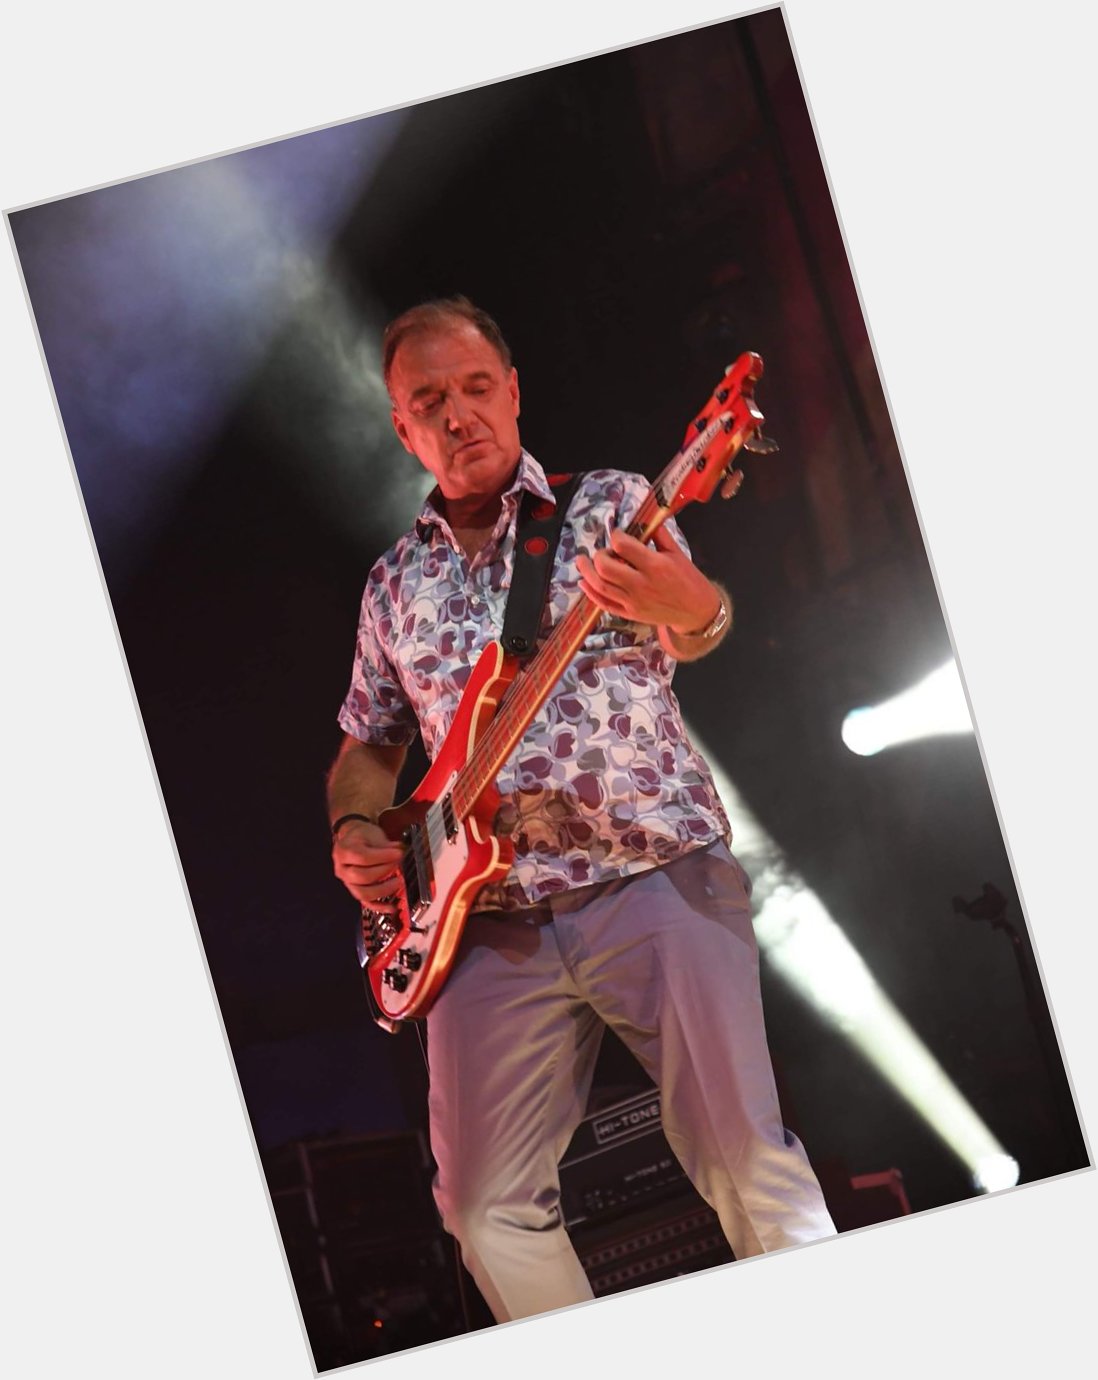 Join us in wishing Guy Pratt, vocalist and bass guitarist for Nick\s Saucers, a very happy birthday! 